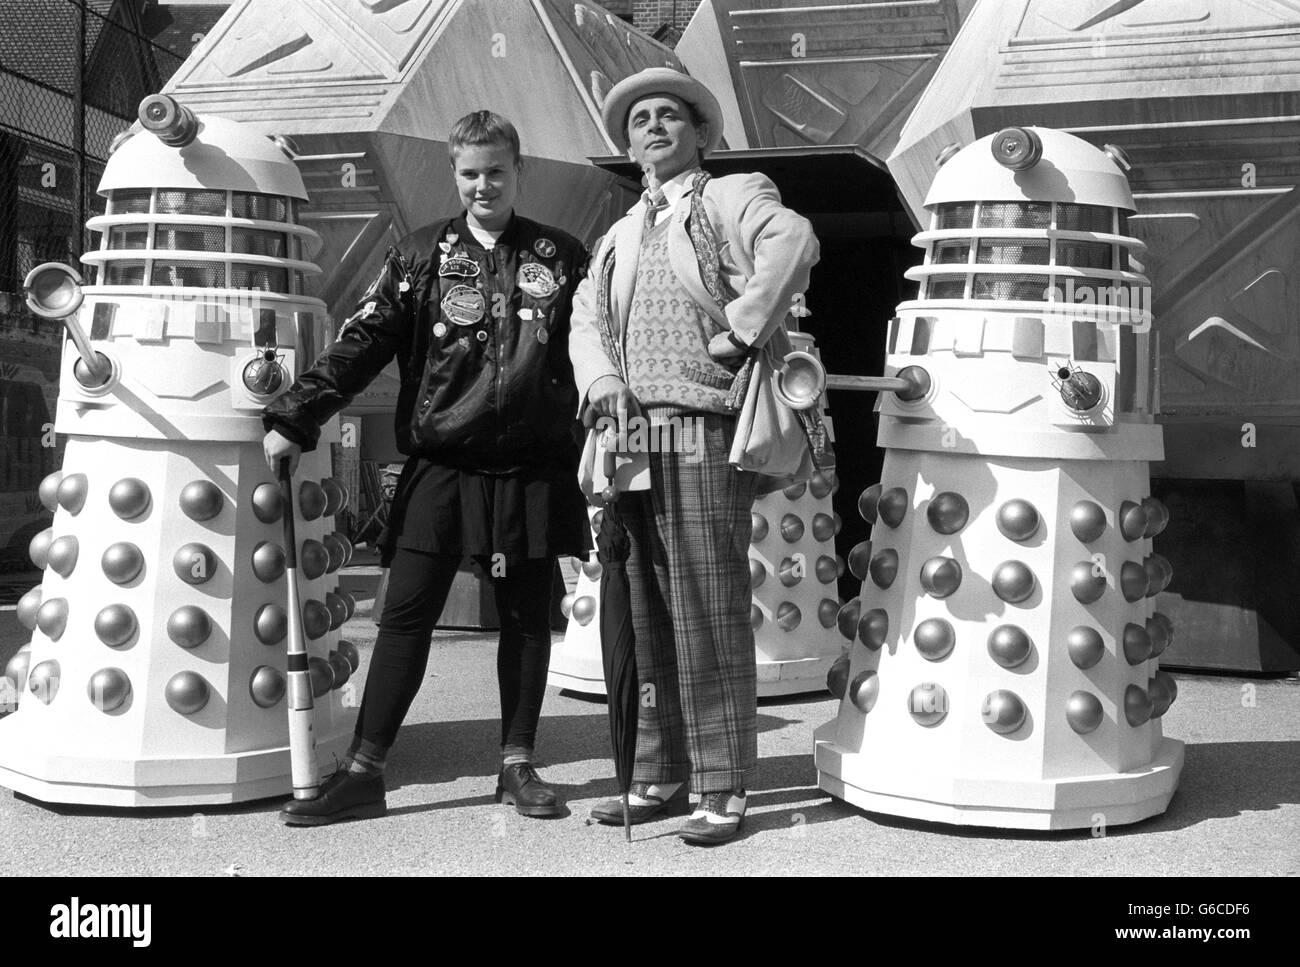 Sylvester McCoy as Doctor Who with his new assistant Ace, played by Sophie Aldred pictured with Daleks. Stock Photo